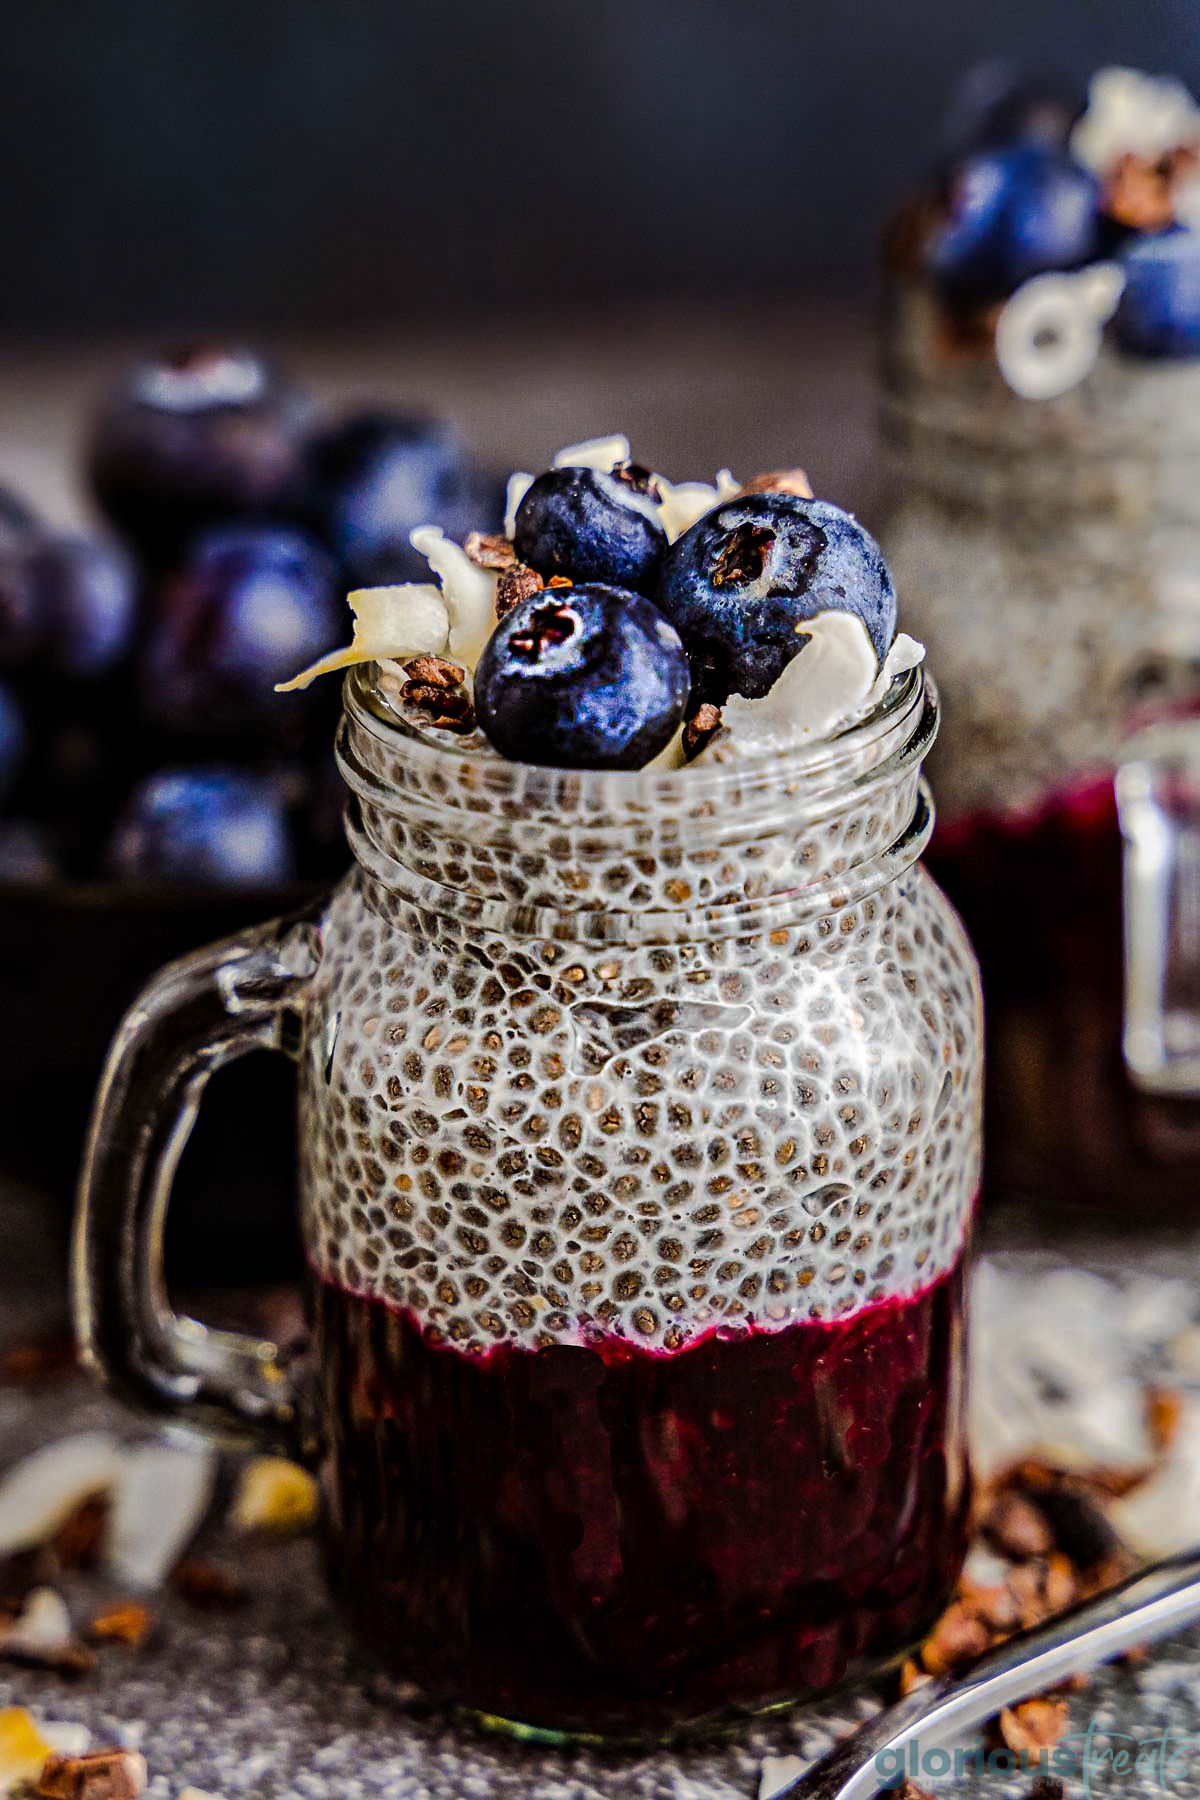 The BEST Chia Seed Pudding Recipe - Glorious Treats